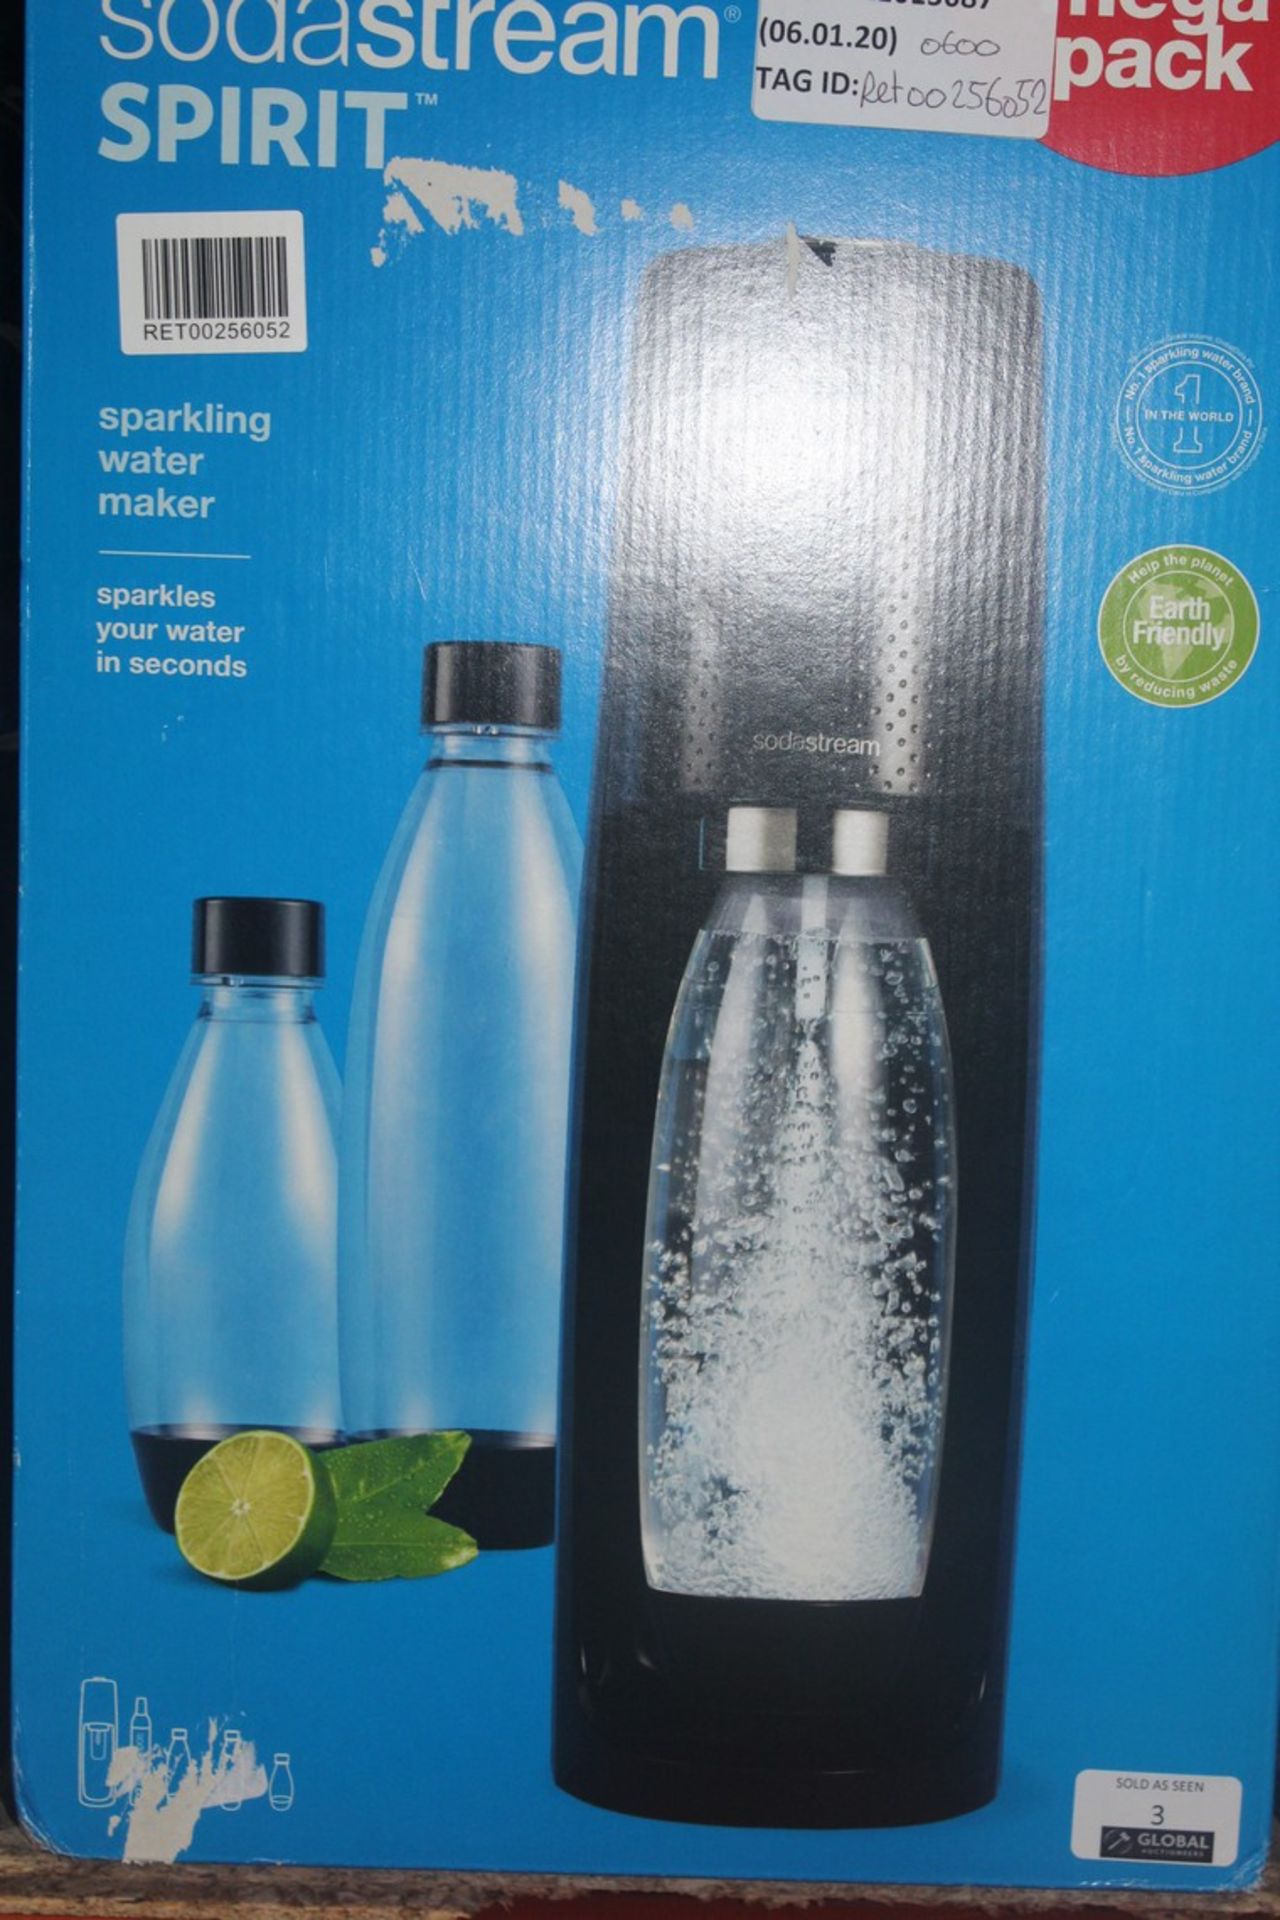 Boxed Soda Stream Spirit Sparkling Water Makers RRP £60 Each (4110729)(RET00256052) (Public